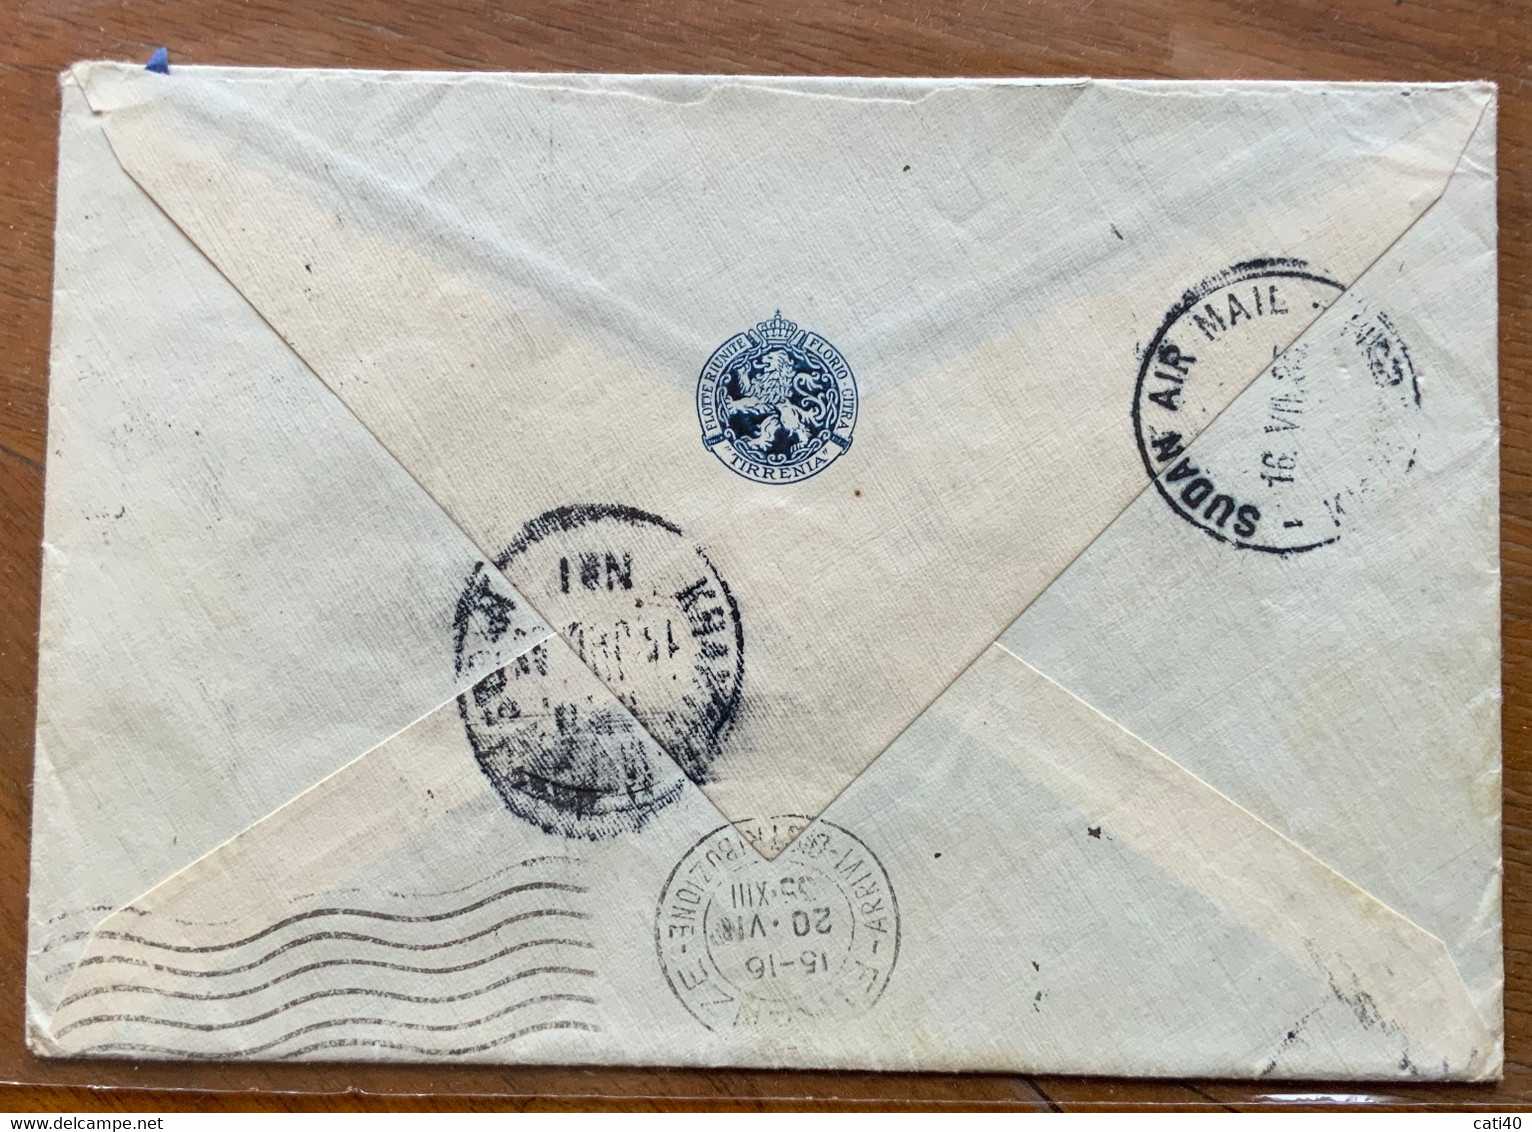 FLOTTE RIUNITE FLORIO - CITRA - TIRRENIA - SUD AN AIR MAIL With 3 PIASTRES/4,5   FROM PORT SAID 13 VII 35  TO FIRENZE - Zuid-Soedan